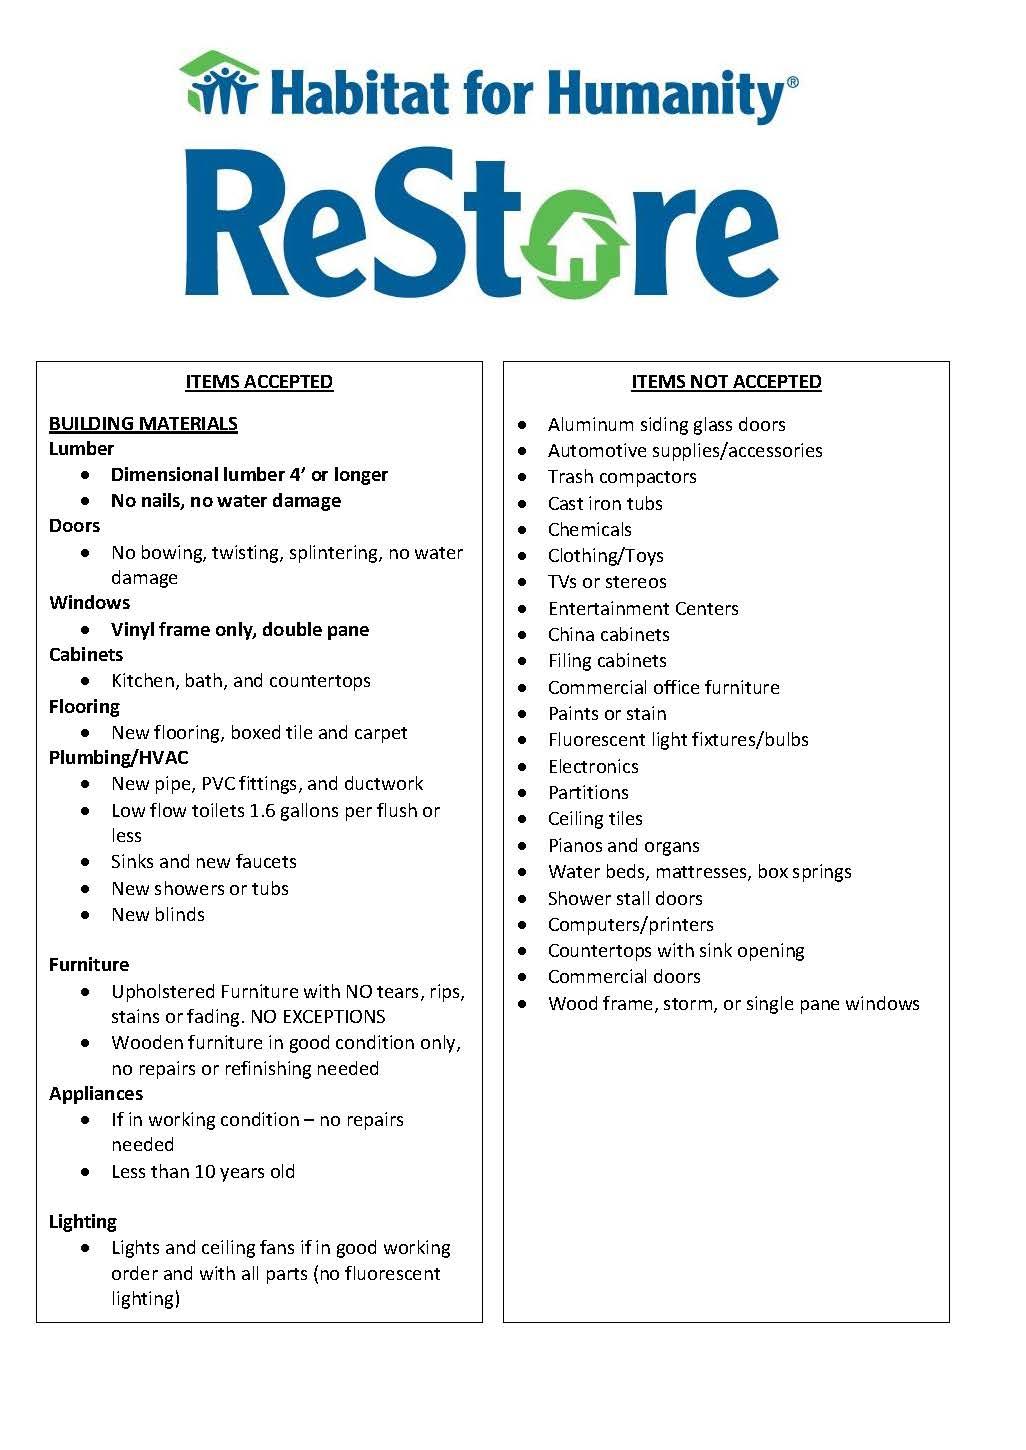 A list of items that we will currently be donating to Habitat for Humanity Capital Region inlcuding: lumber, doors, windows, cabinets, flooring, plumbing, furniture, appliances, and lighting  